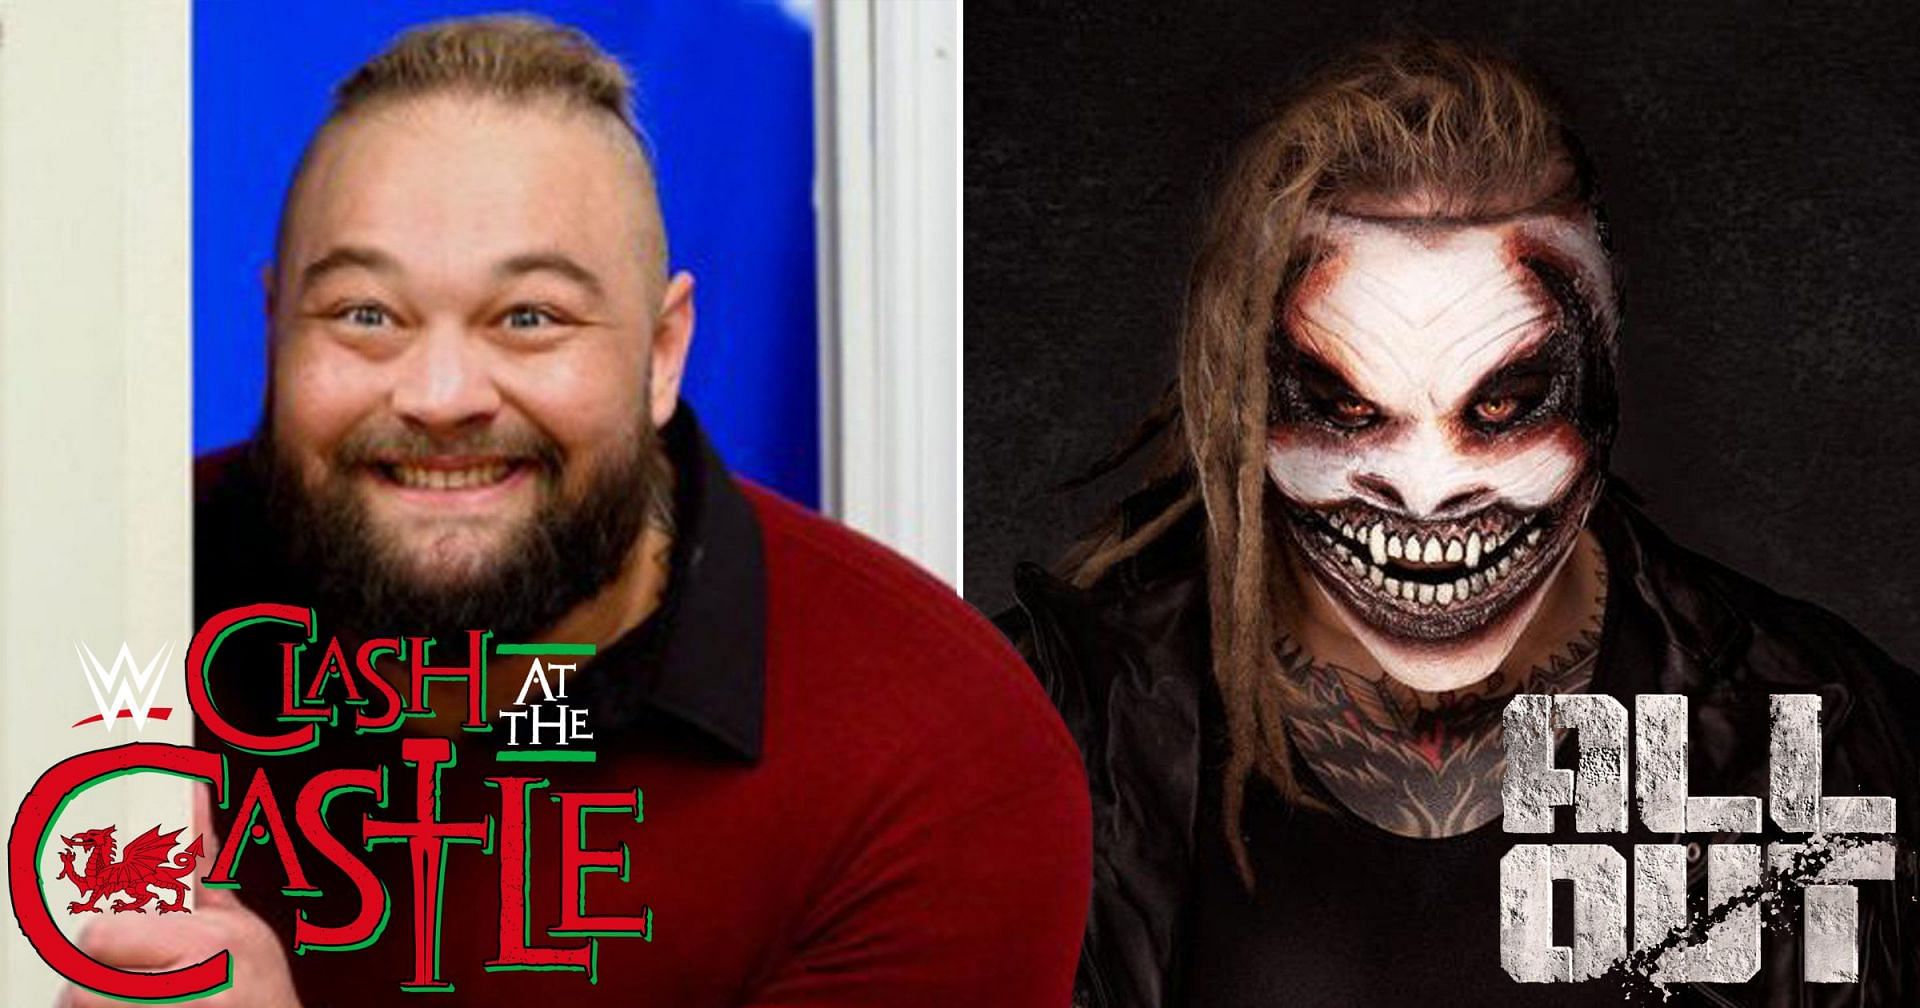 Bray Wyatt could easily fit into either AEW or WWE at this stage.